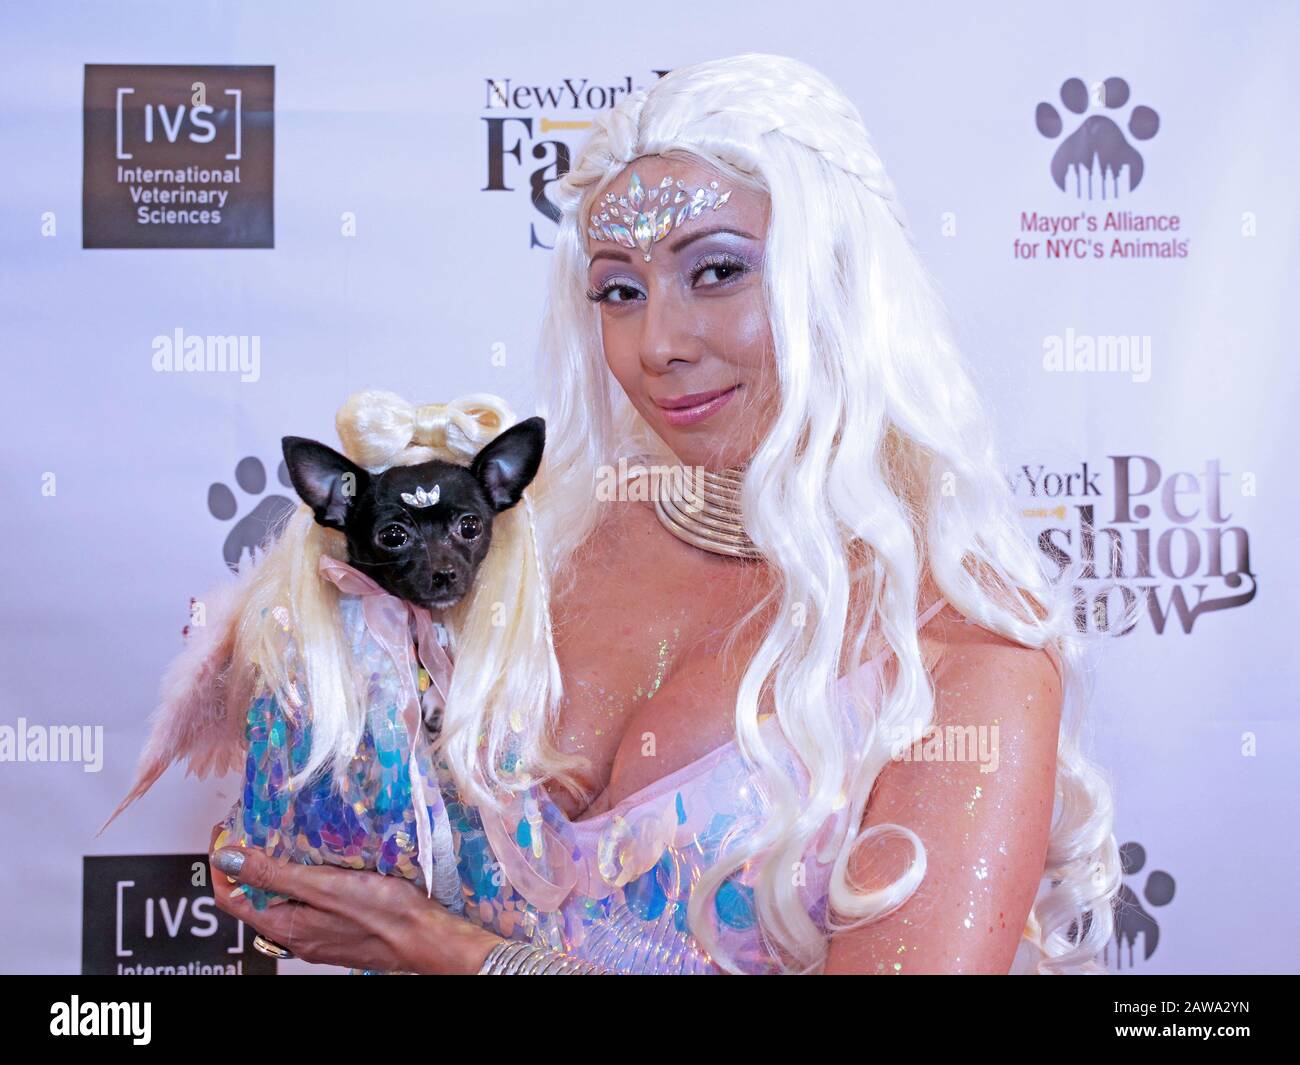 New York, New York, USA. 6th Feb, 2020. The scene at the NY Pet Fashion Show in the Hotel Pennsylvania in NYC. The 17th annual pet charity event raising awareness for pet adpotion and benefiting the Mayor's Alliance for NYC Animals was presented by IVS International Veterinary Science. Credit: Milo Hess/ZUMA Wire/Alamy Live News Stock Photo